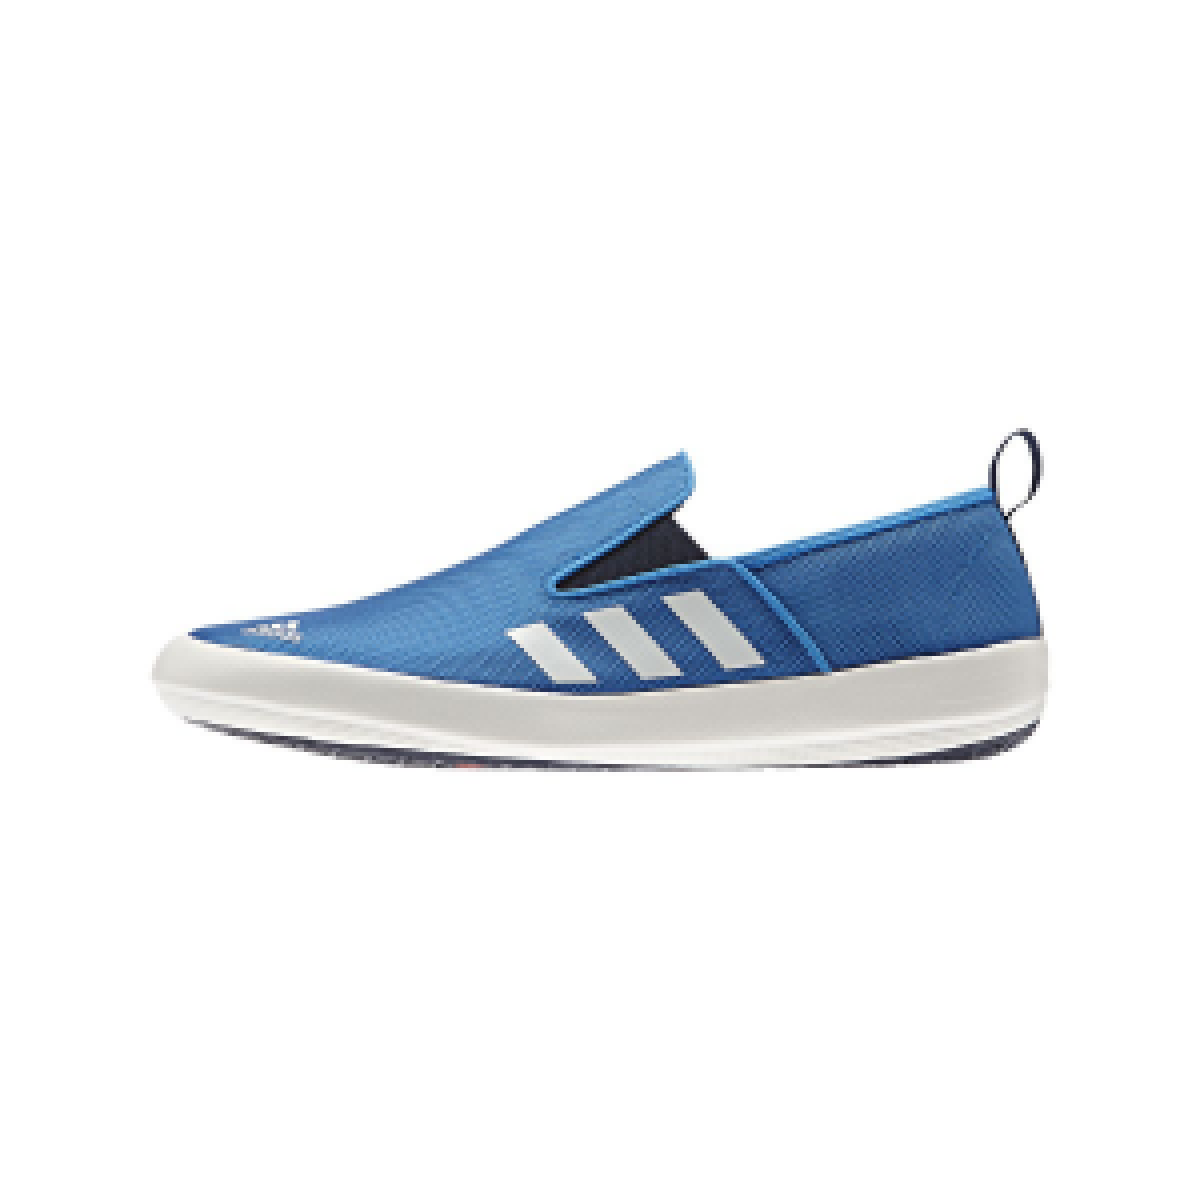 adidas men's boat slip on dlx water shoes